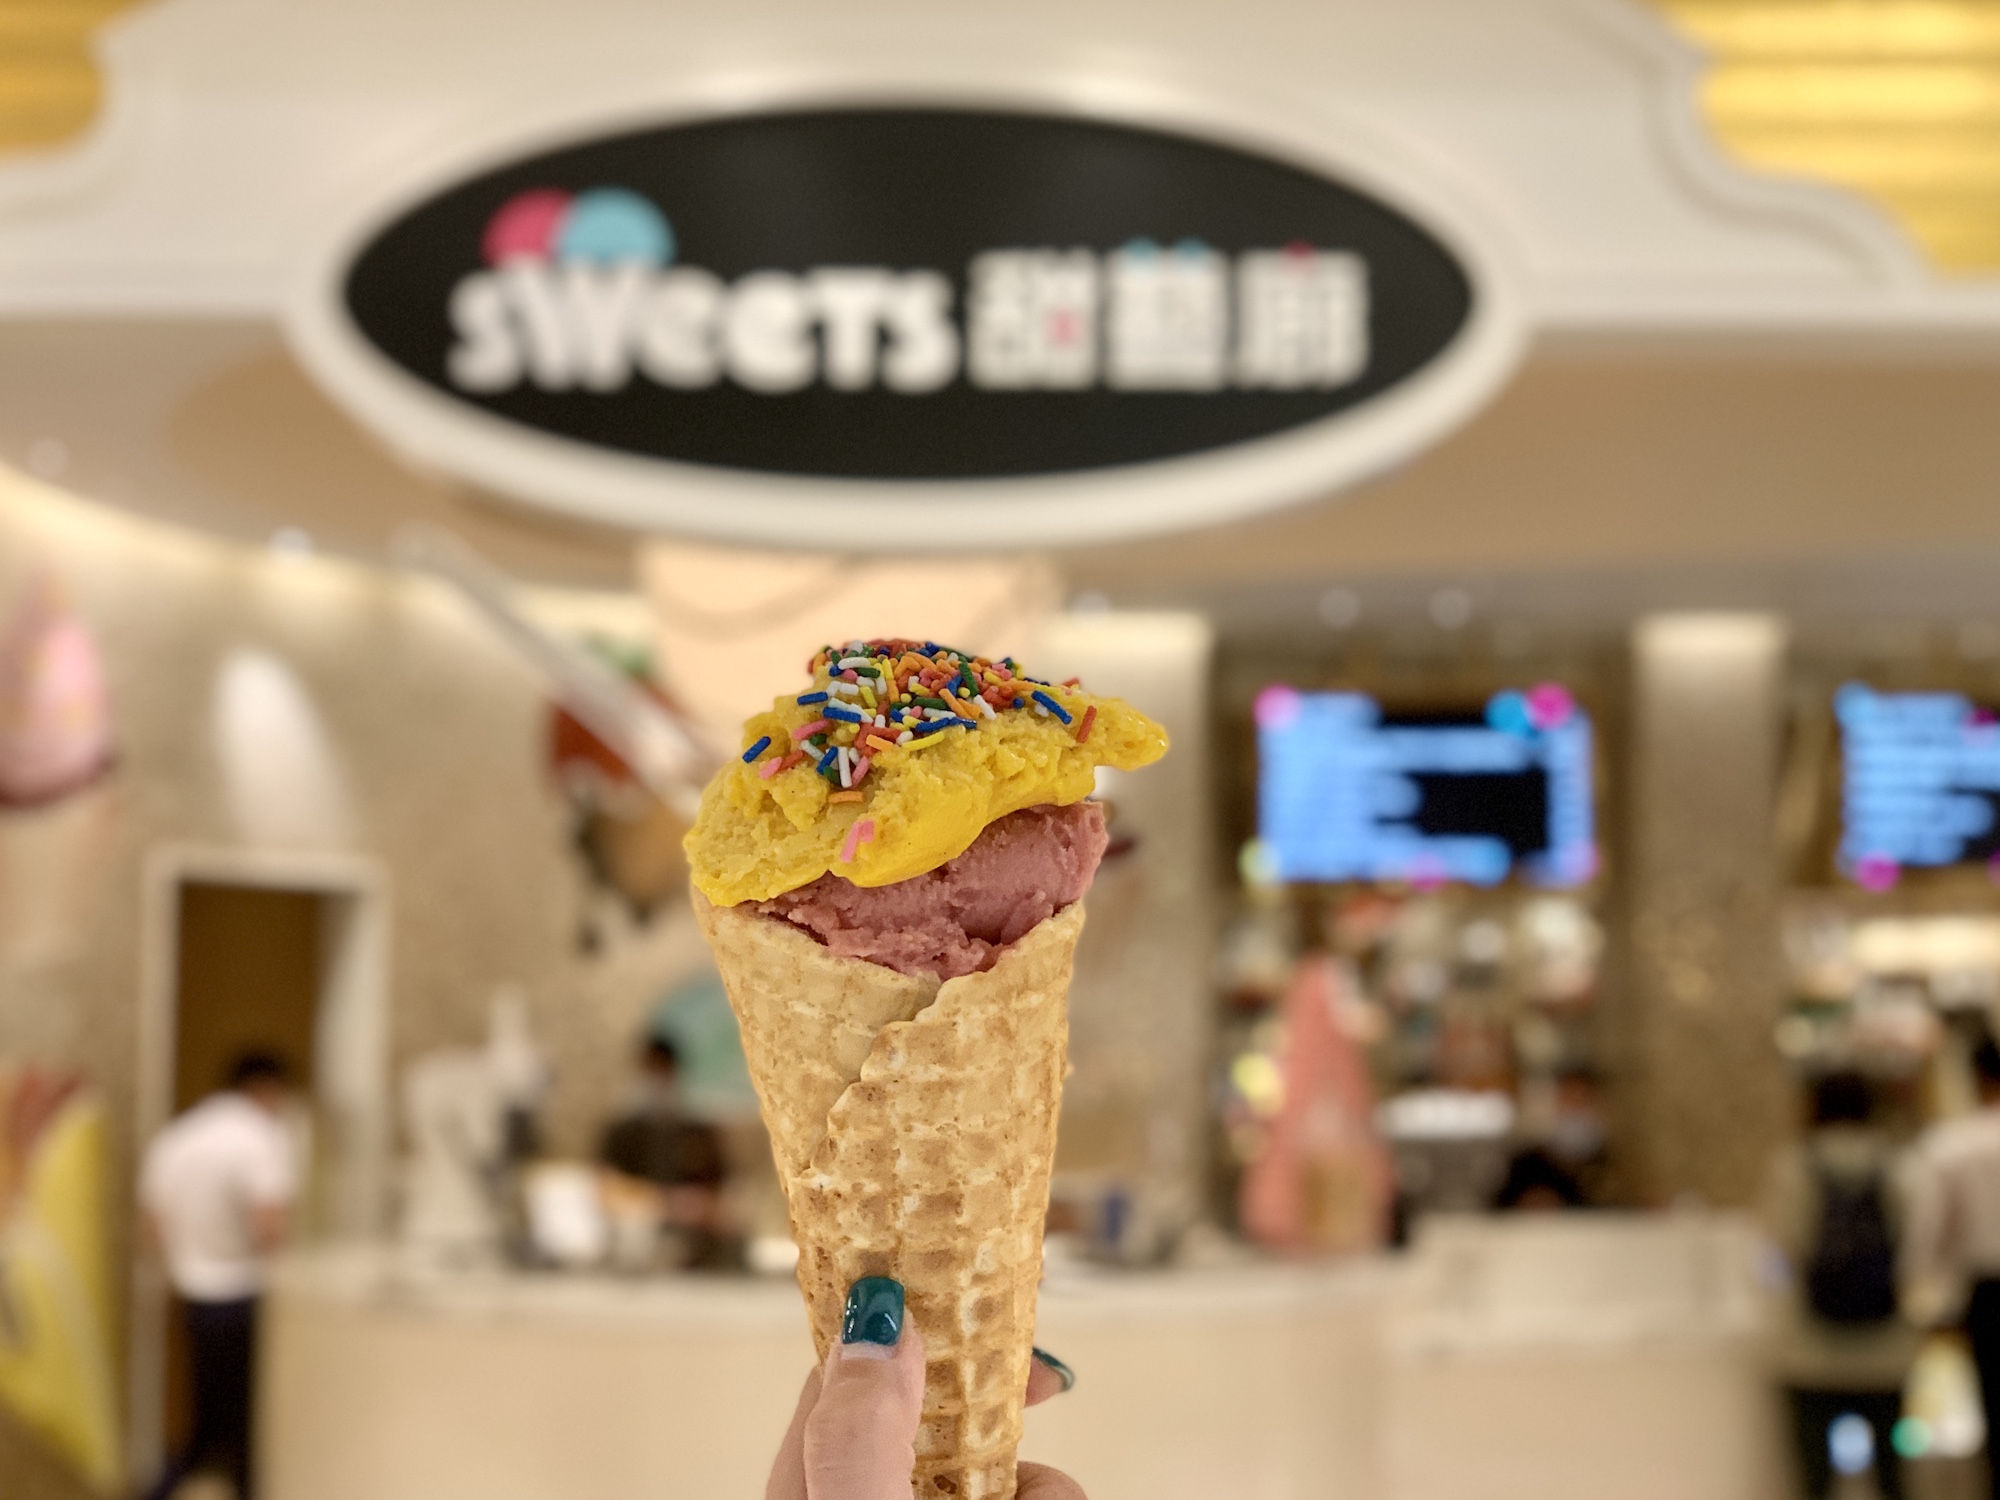 Passionfruit and banana and raspberry lychee and rose ice cream cone from Sweets at Wynn Palace Macau Lifestyle